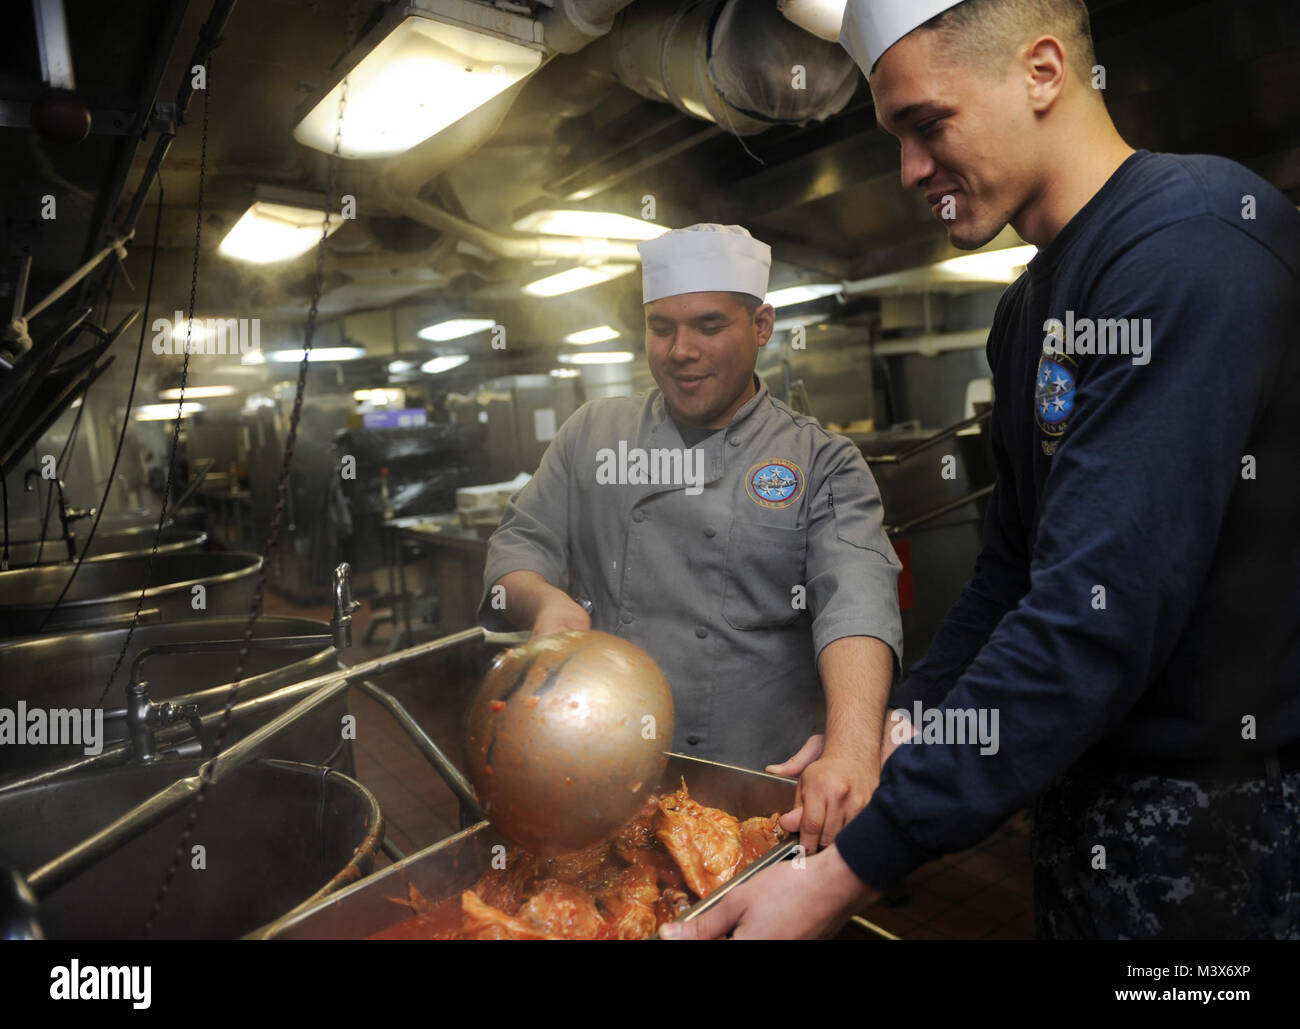 EVERETT, Wash. (March 20, 2014) –  Culinary Specialist Seaman Jose Gomez, left, and Aviation Maintenance Administrationman Airman Recruit Rolando Casana scoop pork onto a pan in the mess decks on board the aircraft carrier USS Nimitz (CVN 68). Nimitz recently returned to its homeport of Naval Station Everett after a nine-month deployment. (U.S. Navy photo by Mass Communication Specialist Seaman Kelly M. Agee/Released) 140320-N-AZ866-055.JPG by USS NIMITZ (CVN 68) Stock Photo